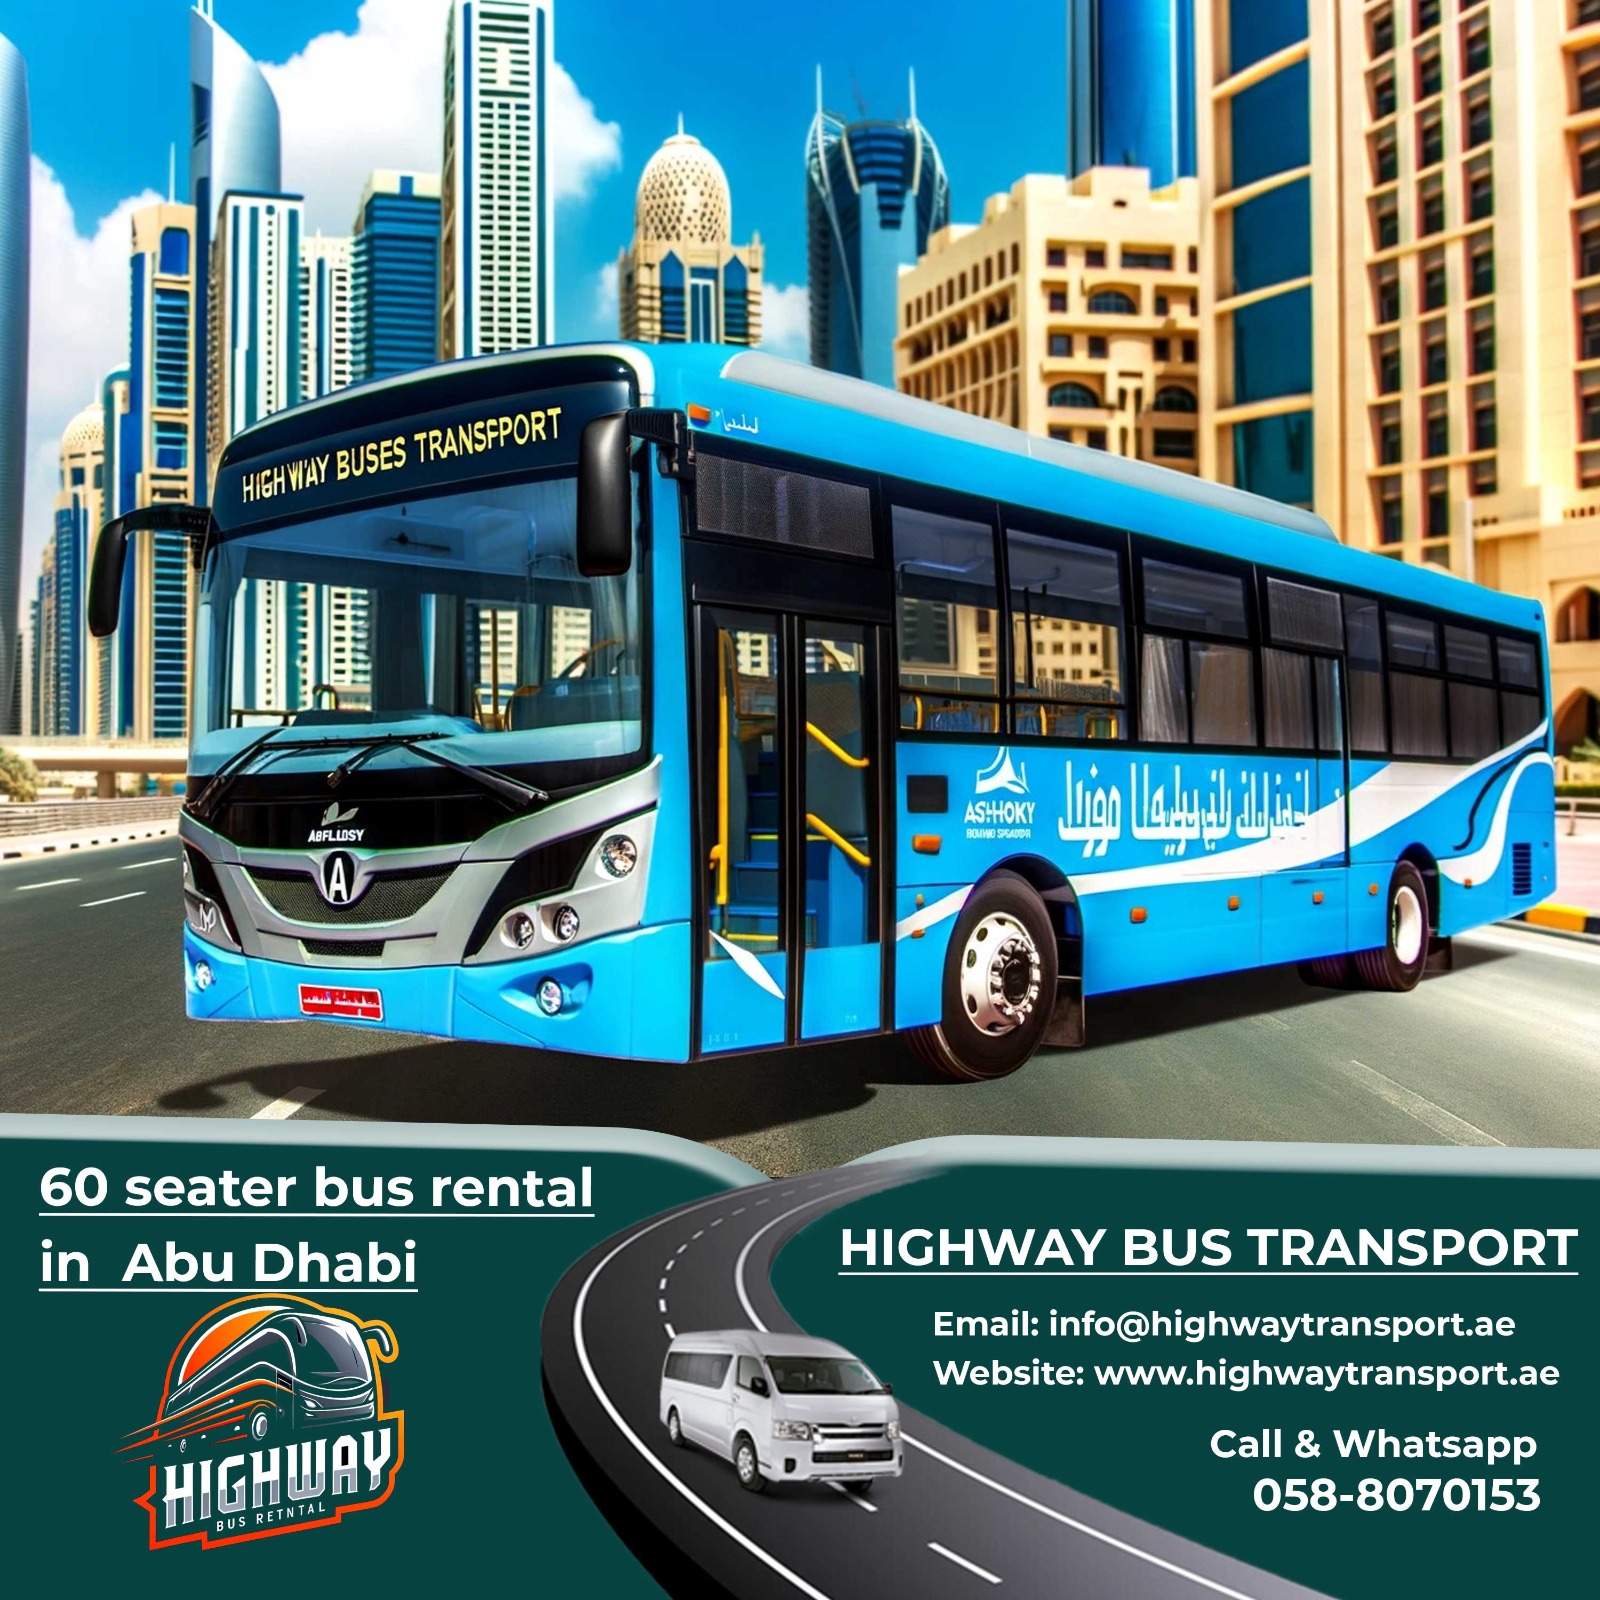 Image of a 60-seater bus available for rental in Abu Dhabi